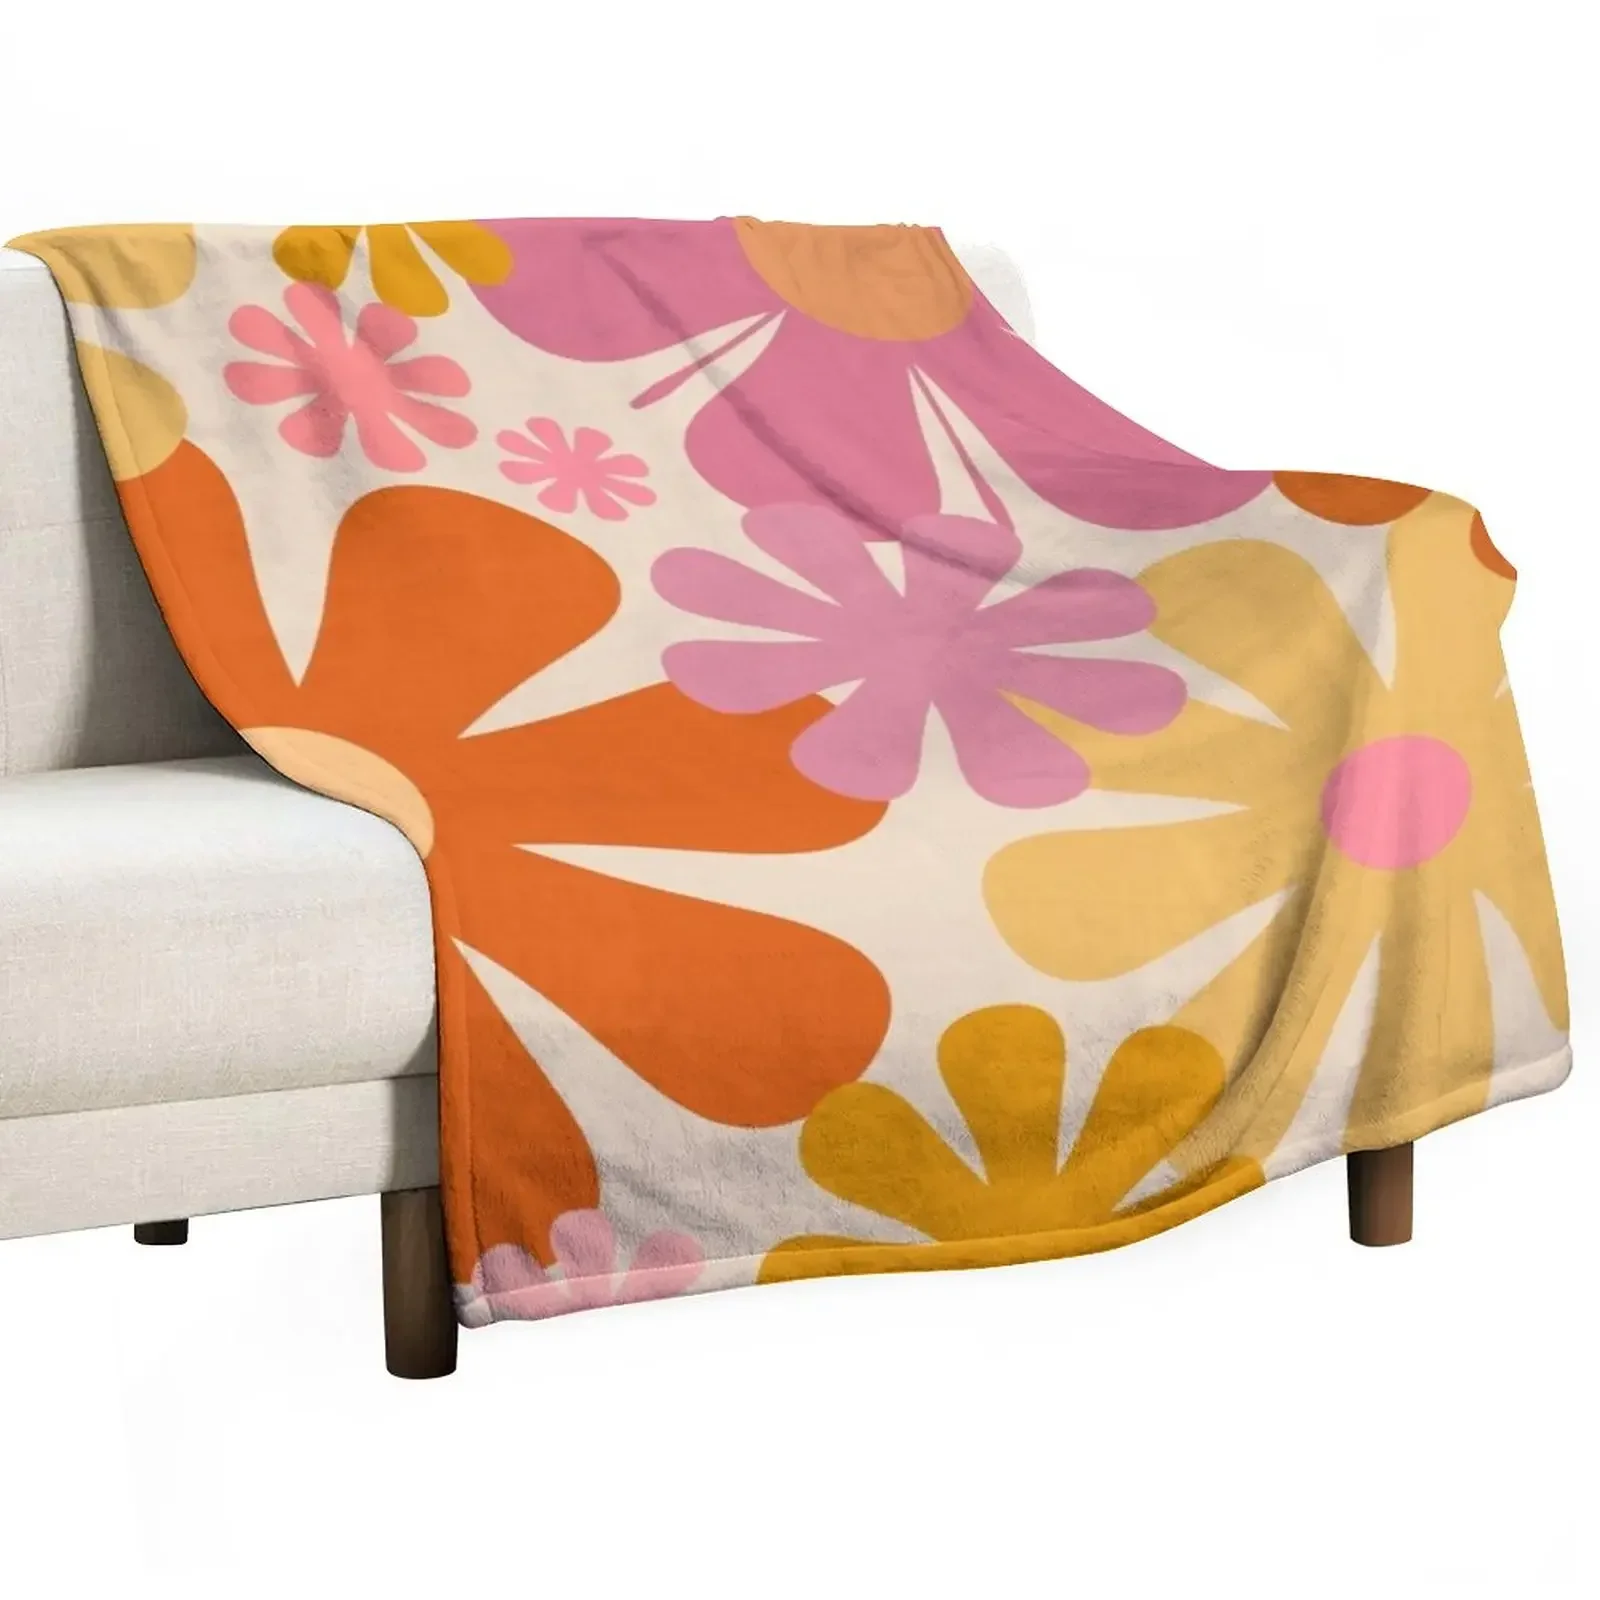 

Retro 60s 70s Flowers - Vintage Style Floral Pattern in Thulian Pink, Orange, Mustard, and Cream Throw Blanket Kid'S Blankets